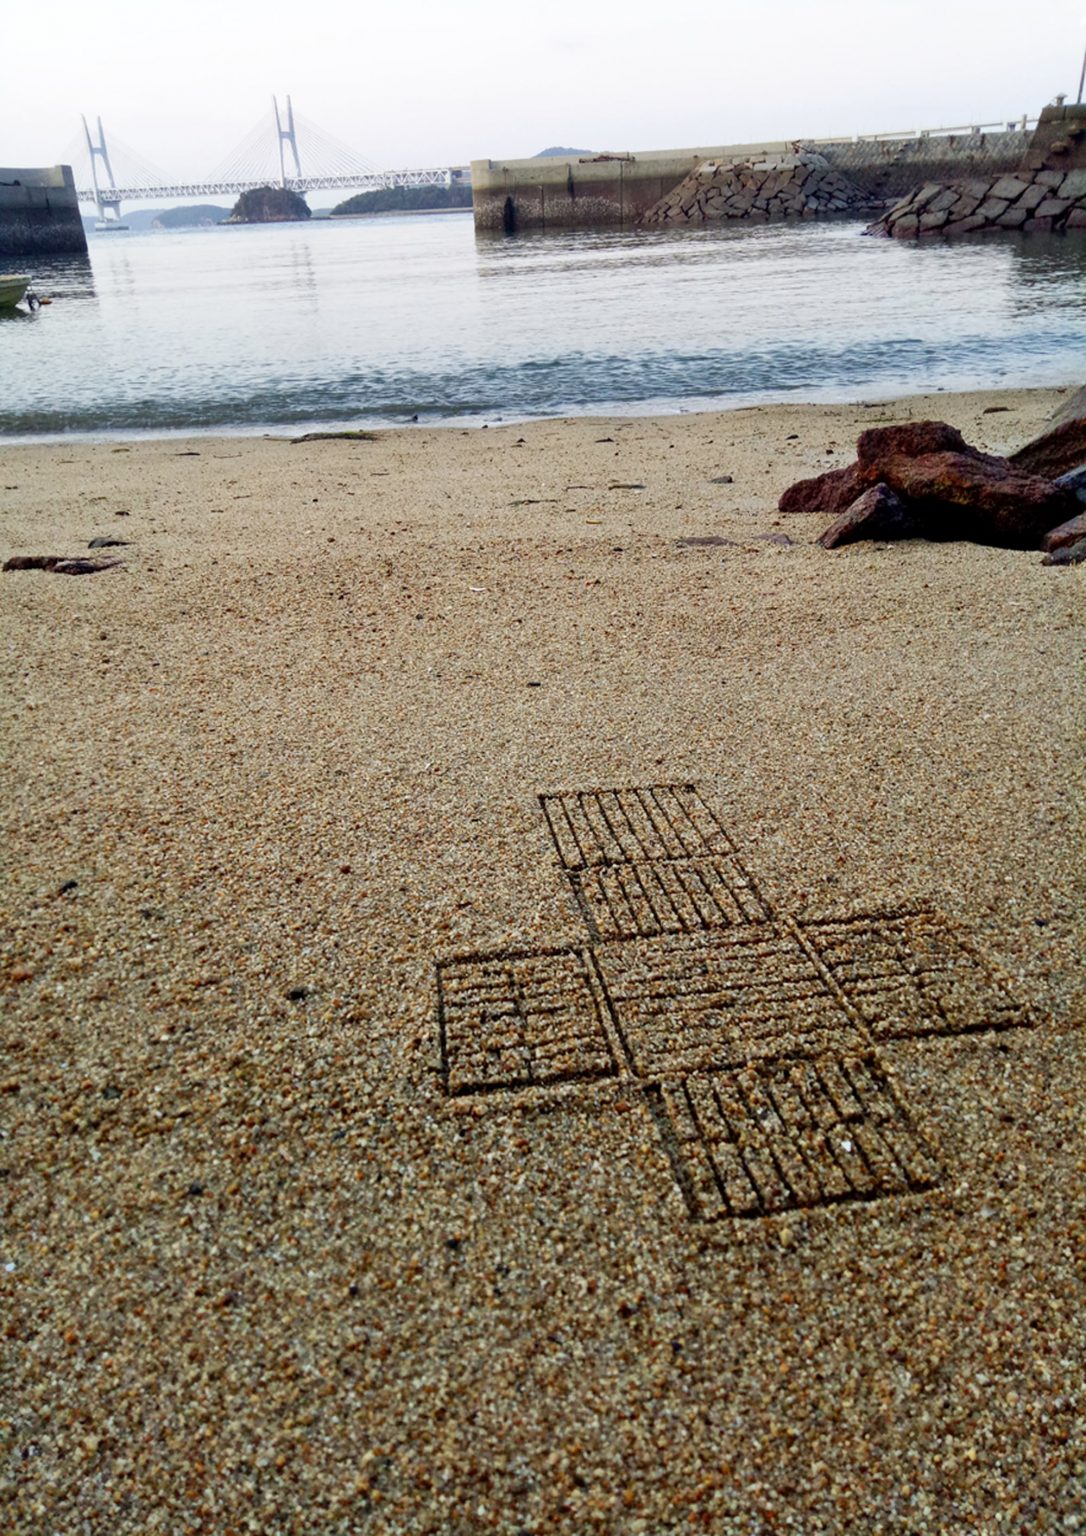 A geometric pattern embedded in the sand of an island beach at the water's edge.